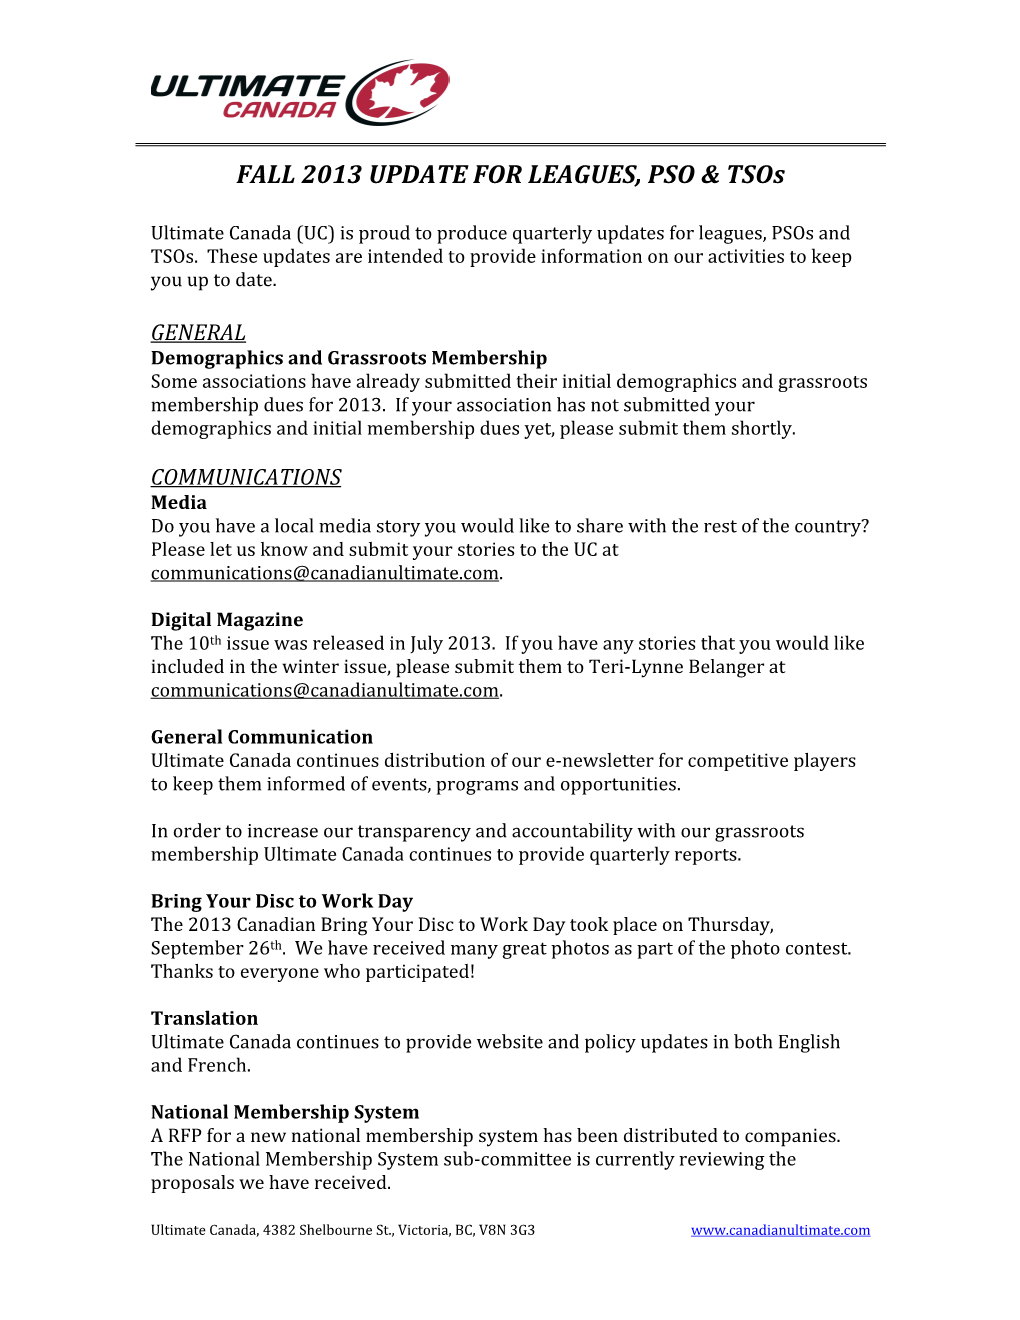 FALL 2013 UPDATE for LEAGUES, PSO & Tsos